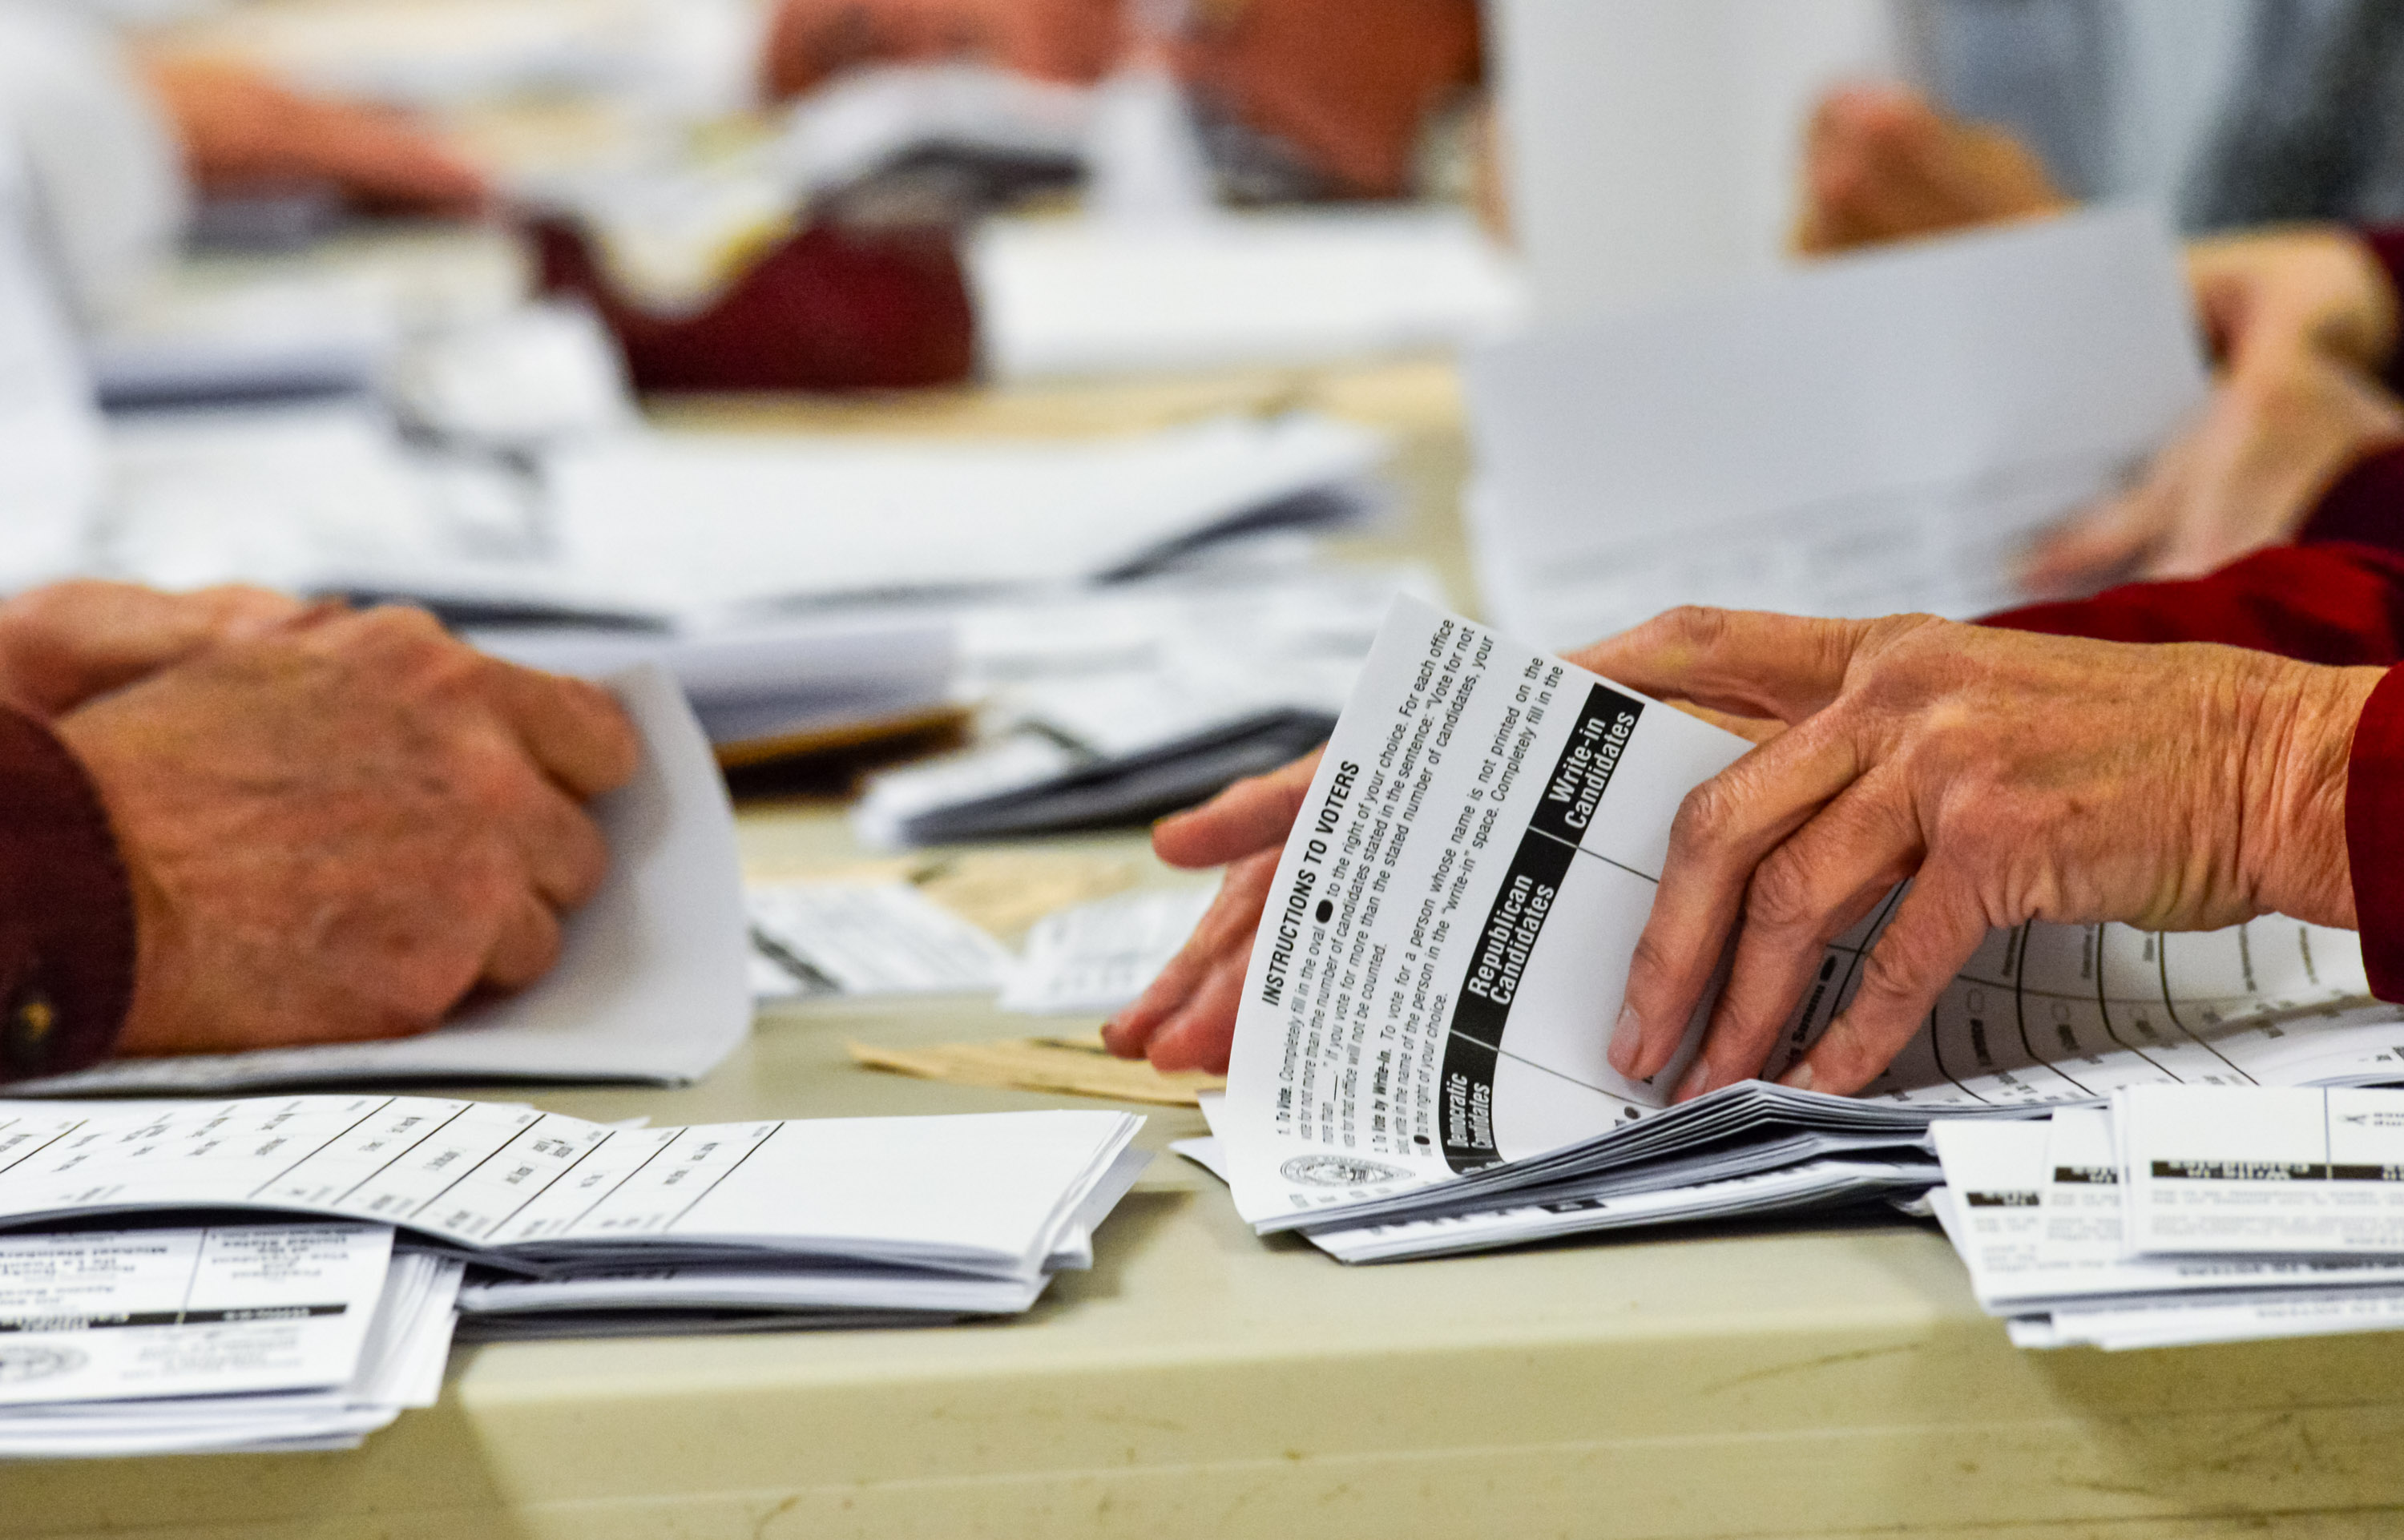 close up view of hands counting stacks of ballots